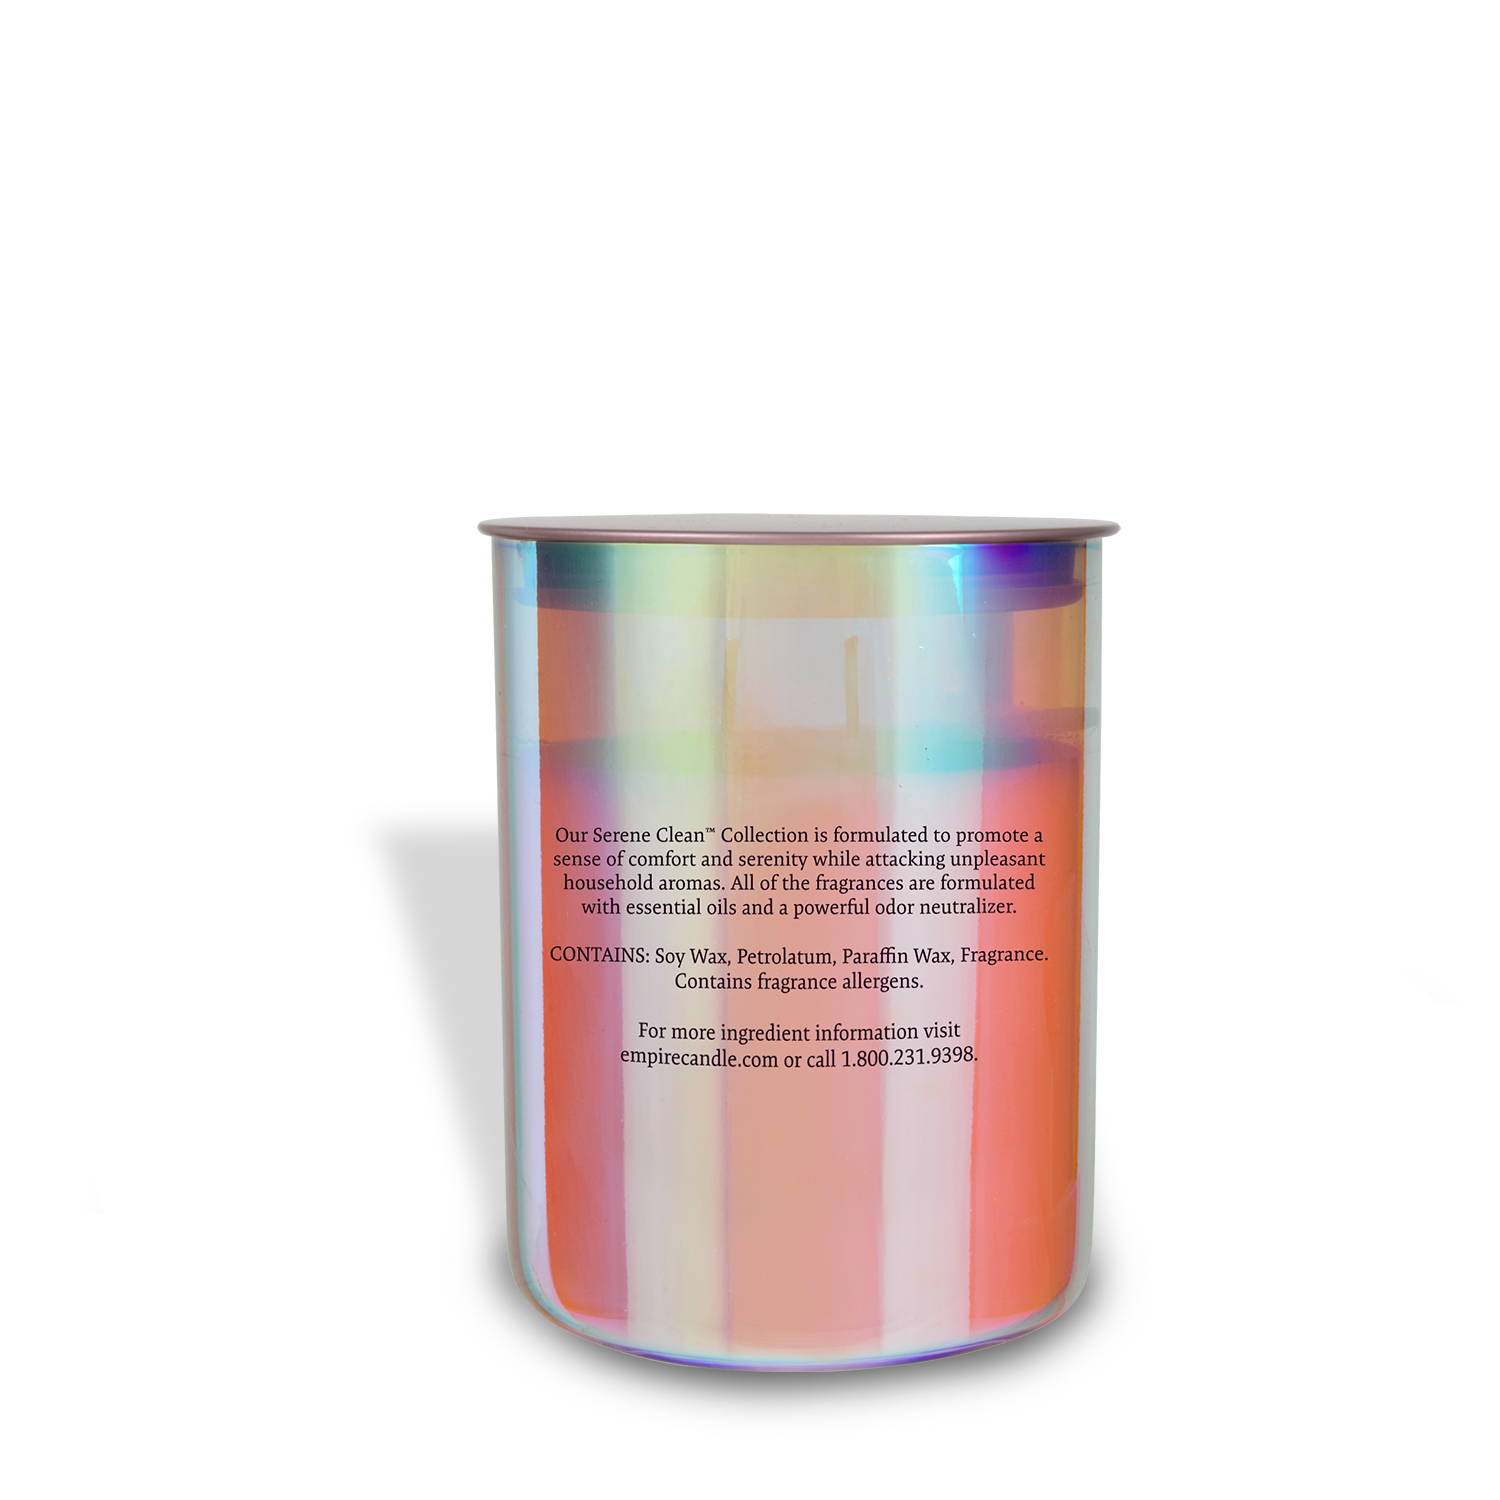 A Tuscany Candle® EVD tin container with an iridescent label on it, designed for odor control.